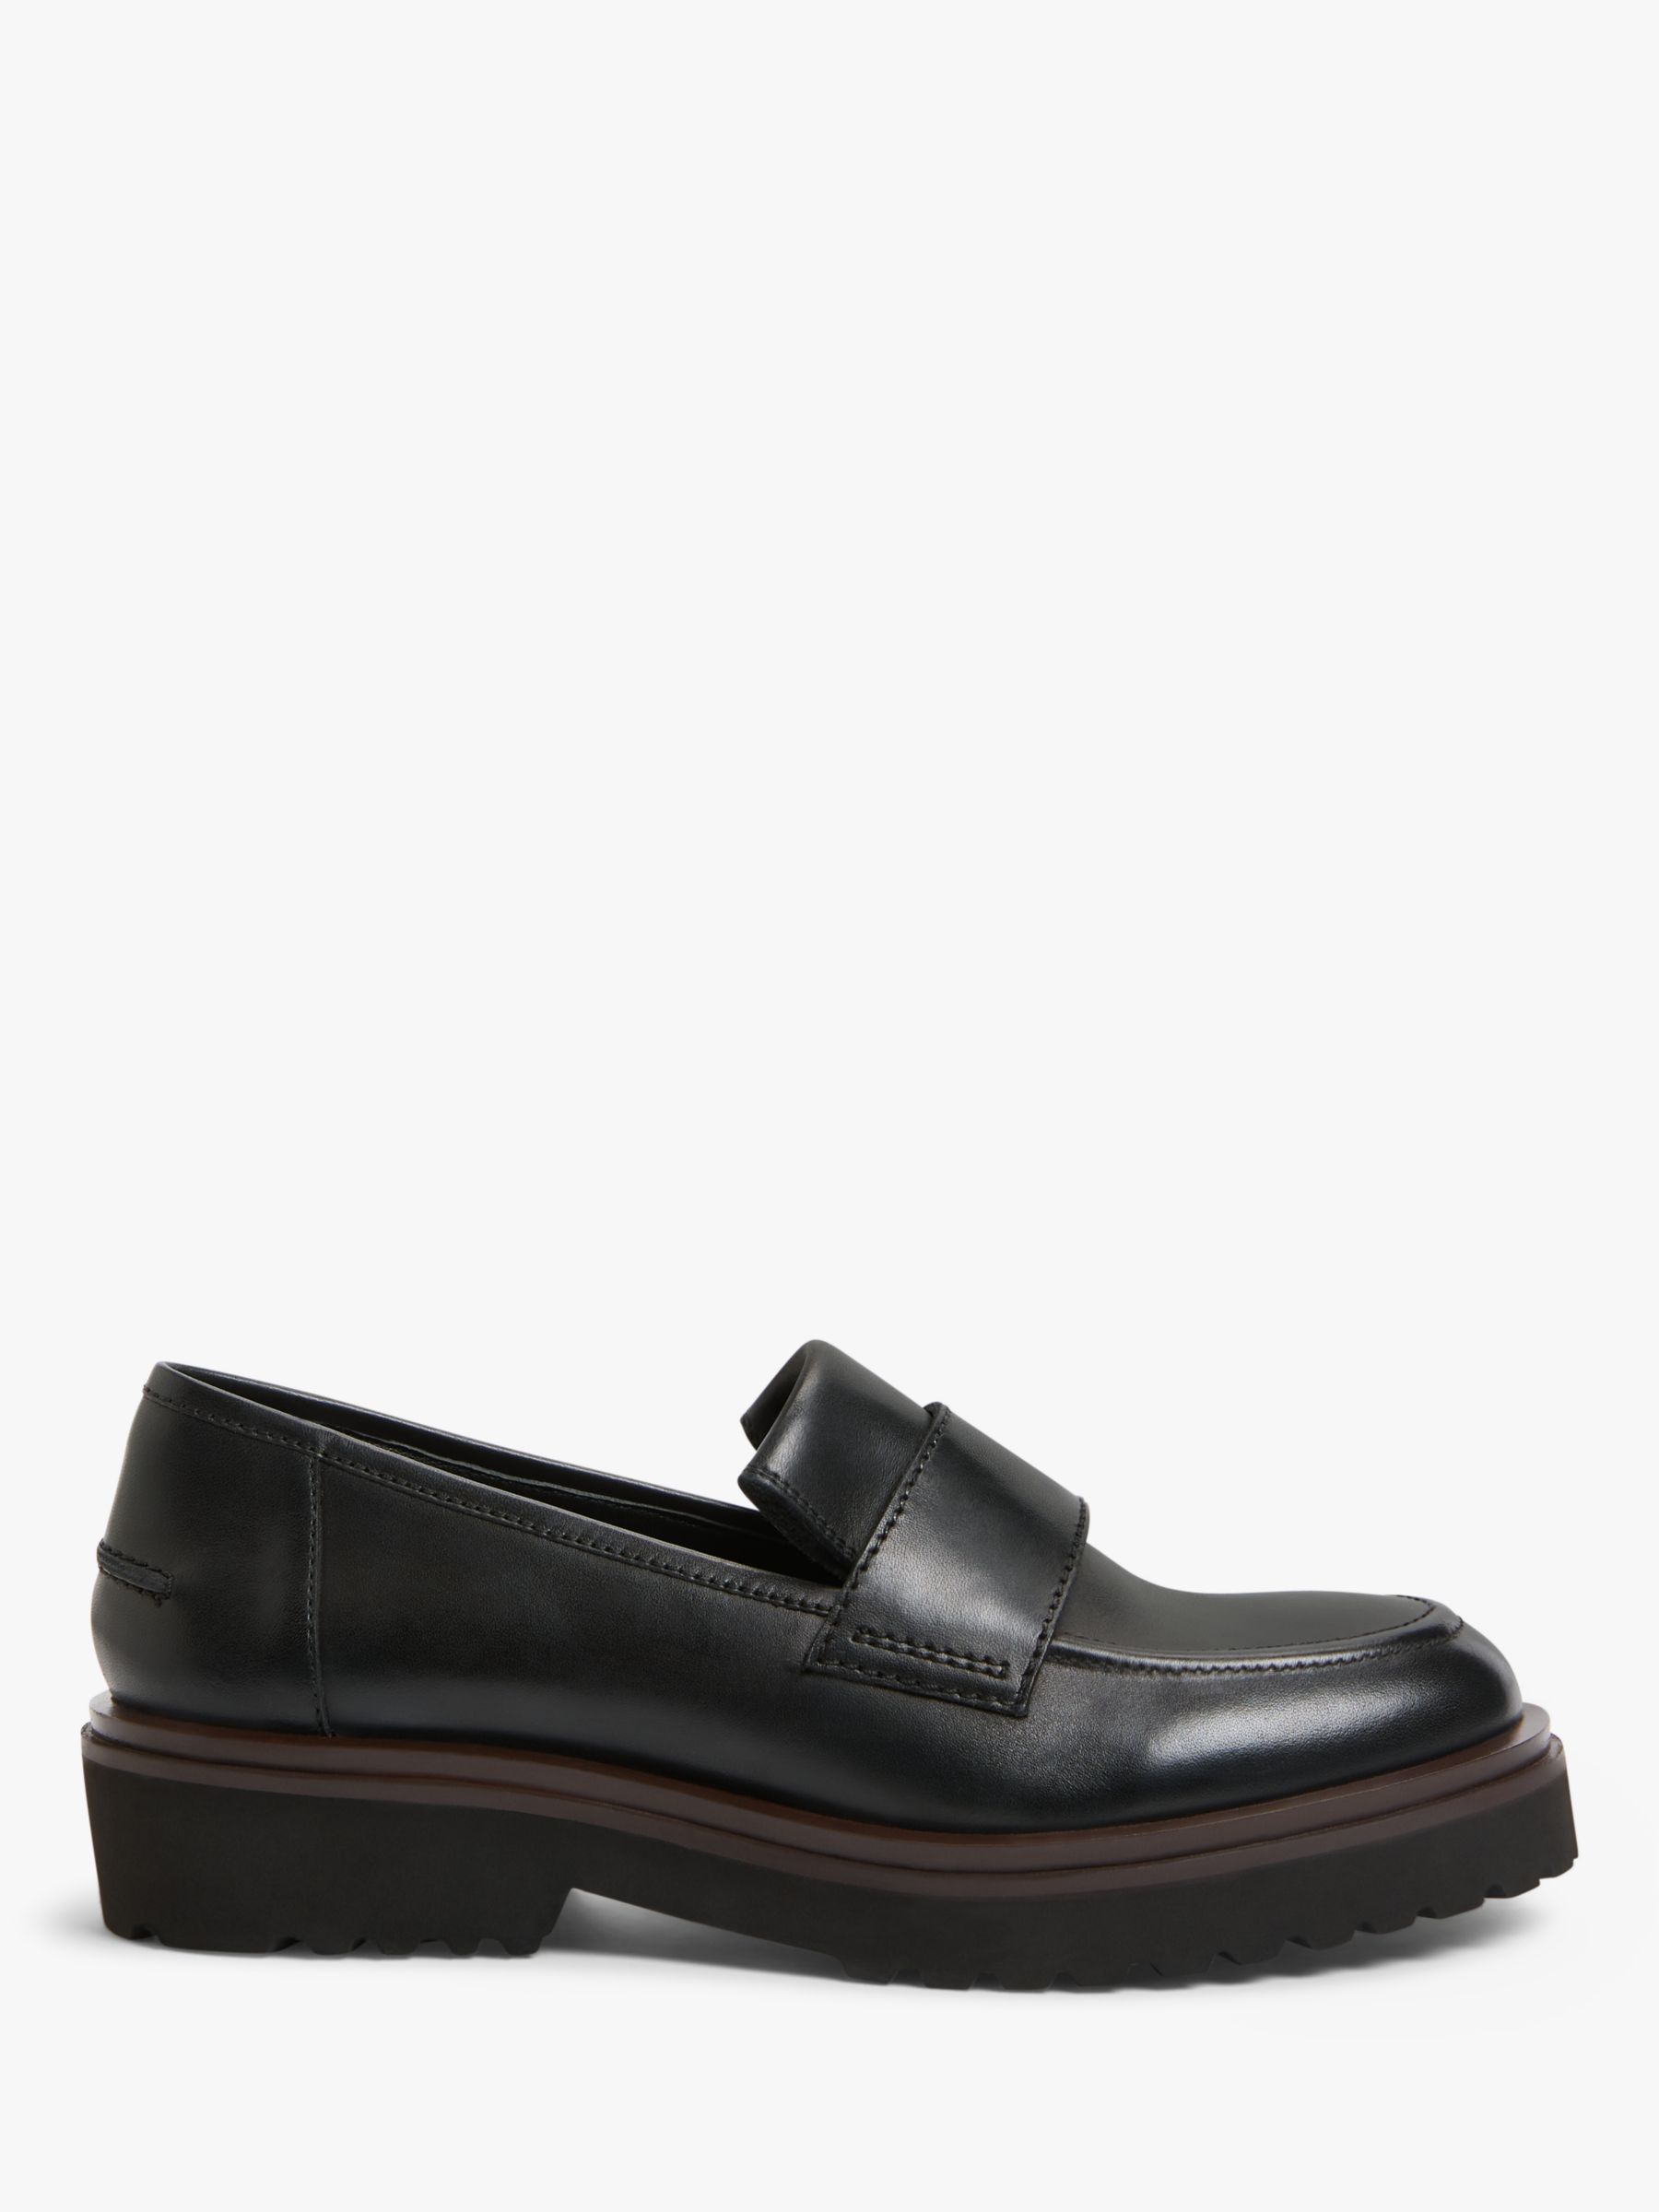 Kin Gracie Leather Cleated Sole Loafers, Black at John Lewis & Partners